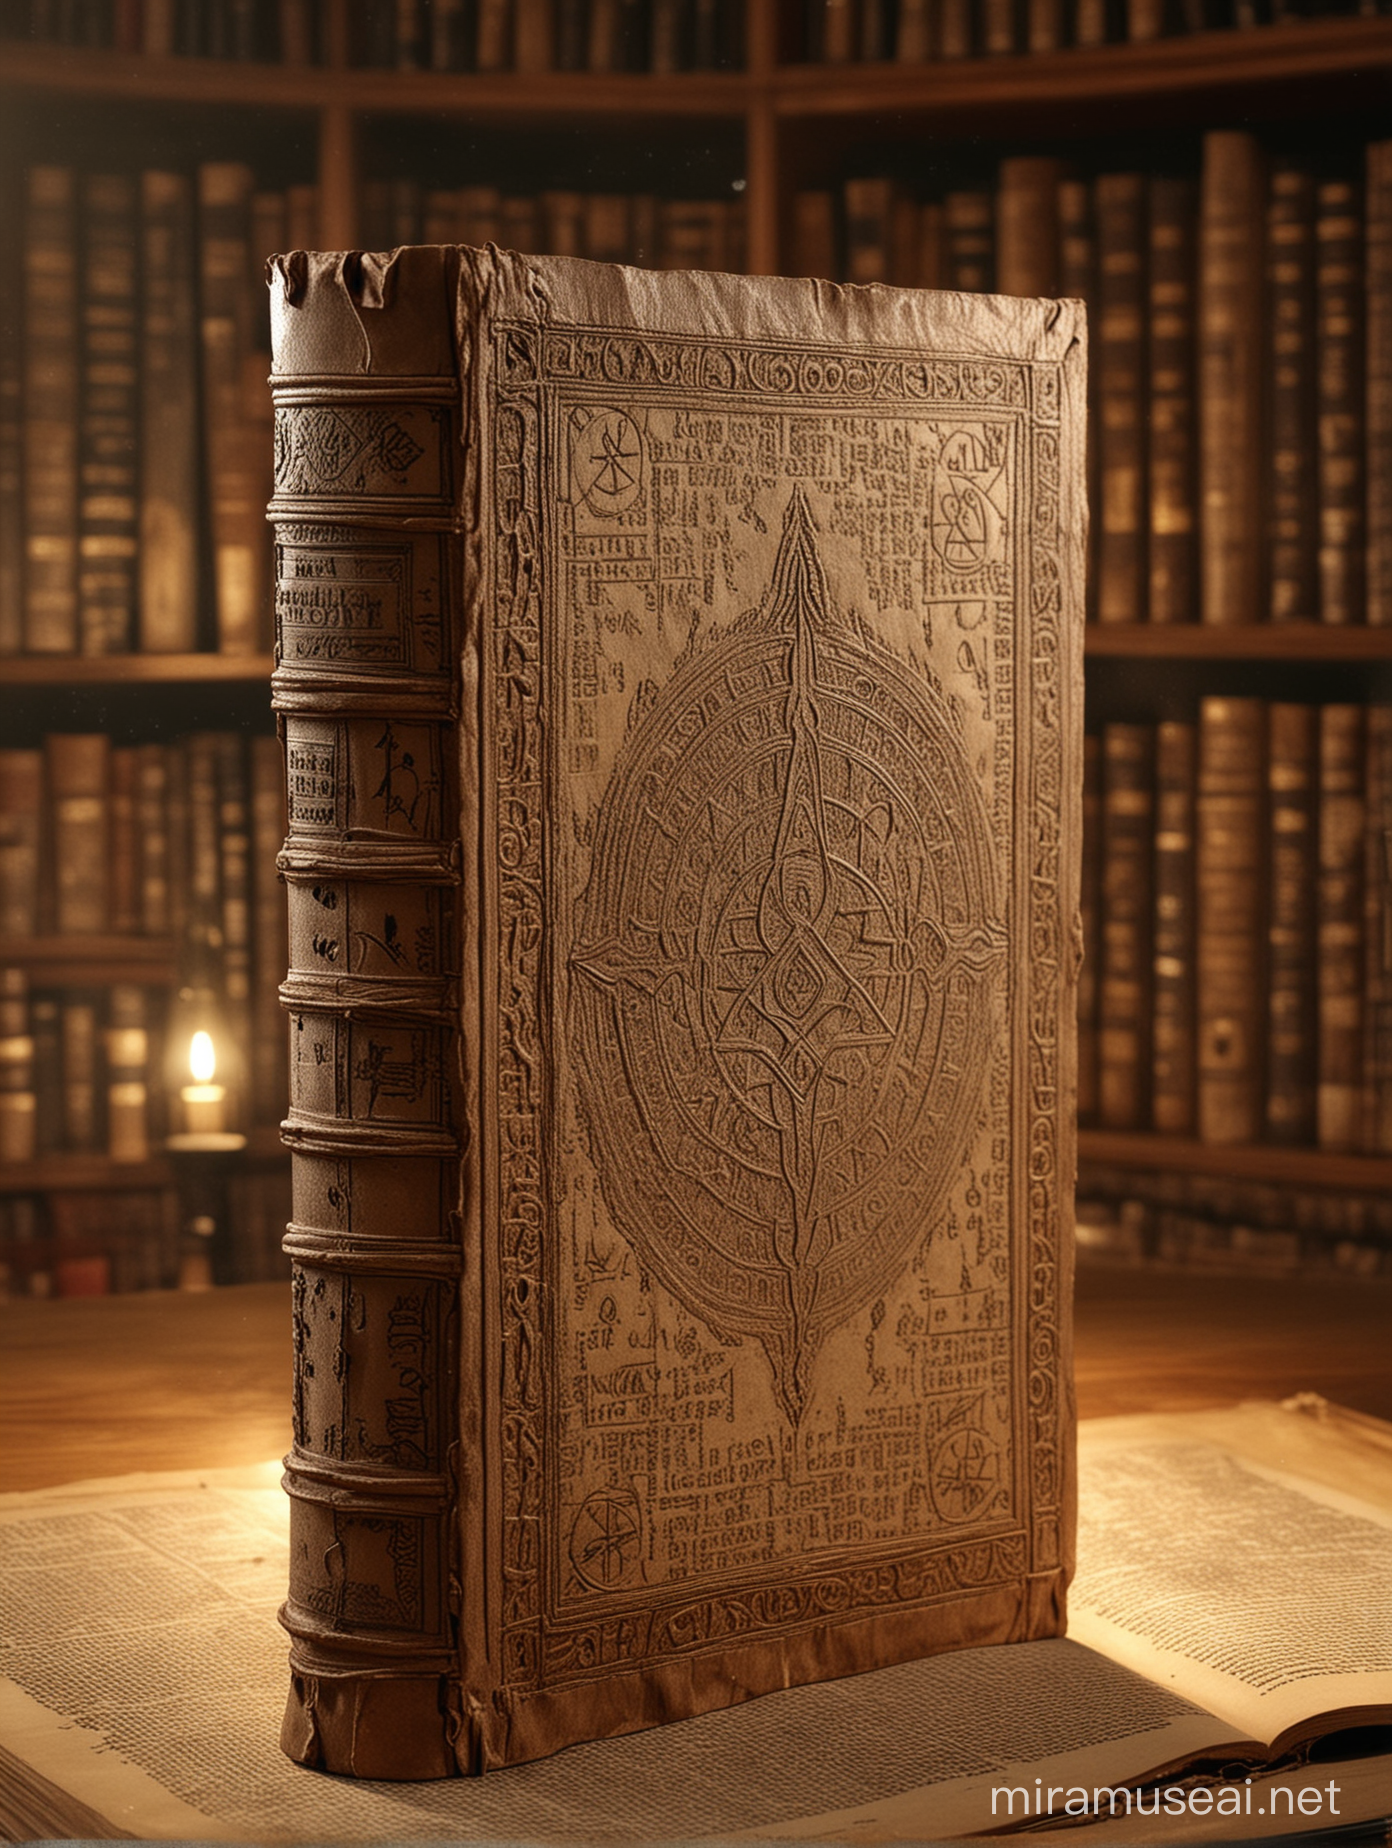 Intricate SymbolAdorned Leather Book on Library Pedestal